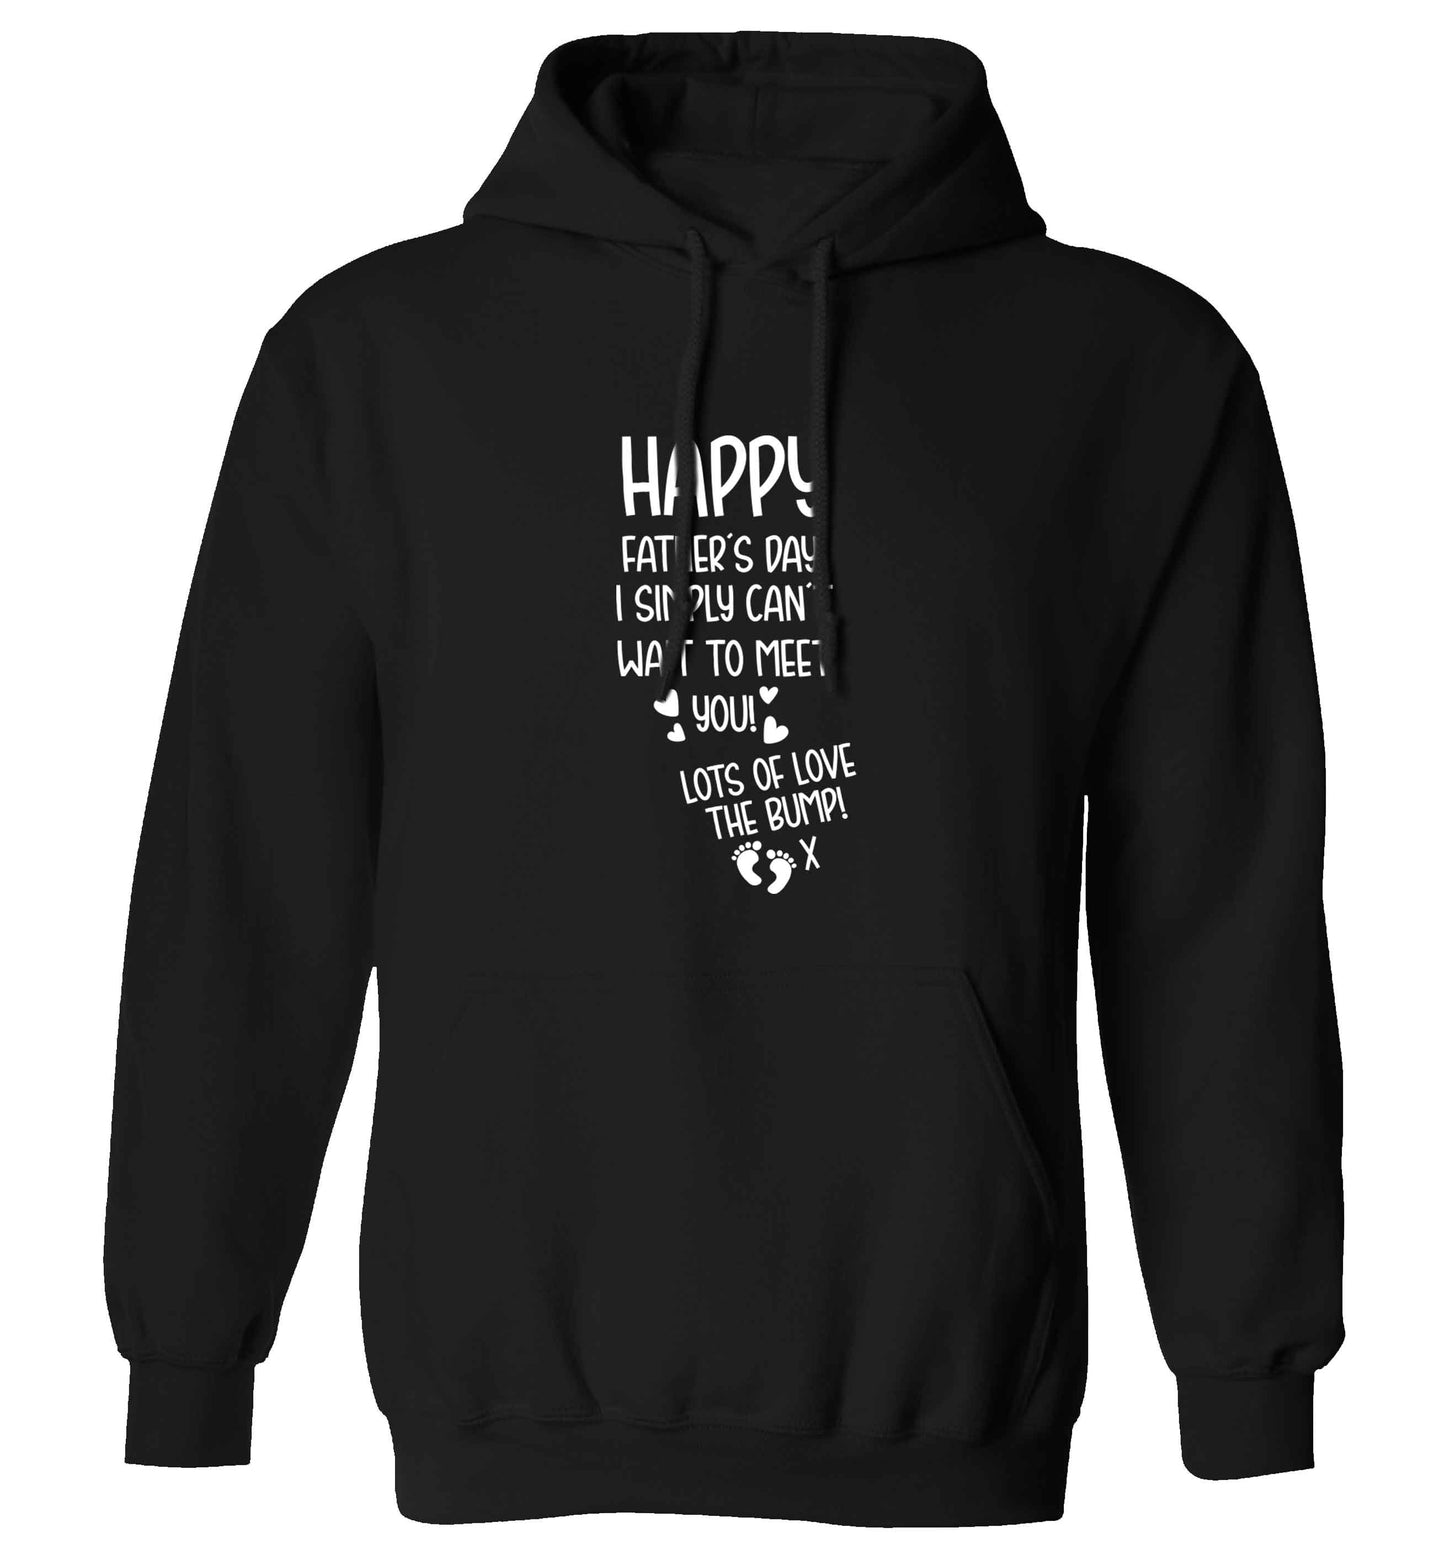 Happy Father's day daddy I can't wait to meet you lot's of love the bump! adults unisex black hoodie 2XL